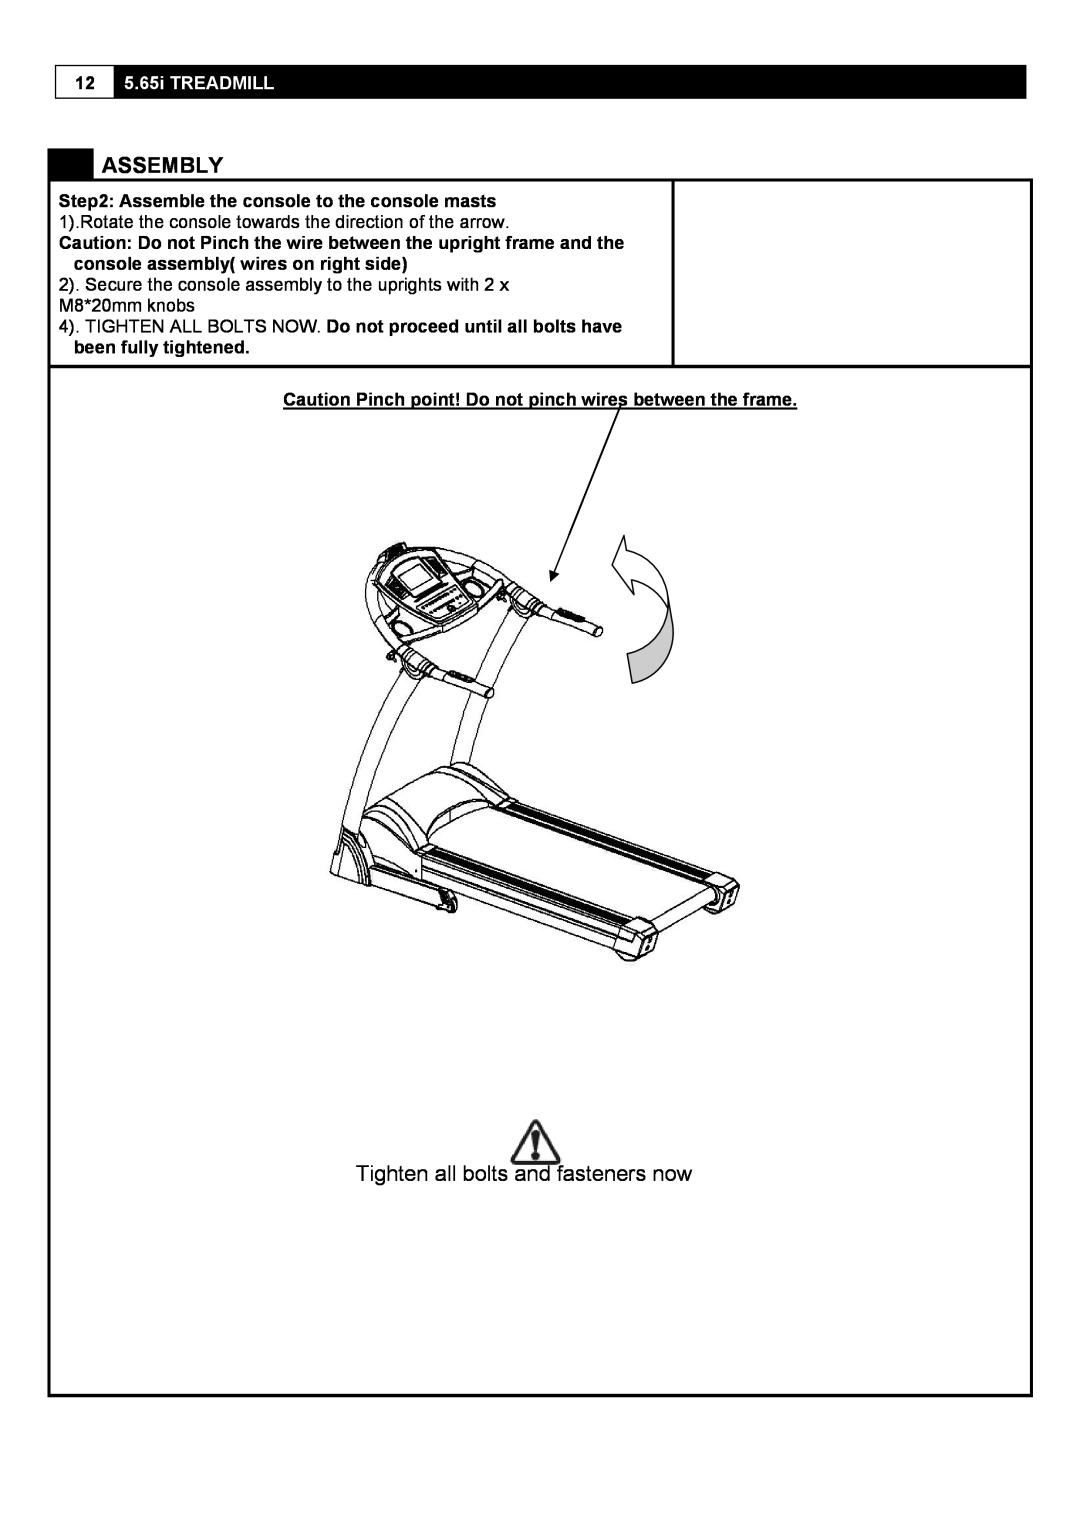 Smooth Fitness 5.65I user manual Assembly, Tighten all bolts and fasteners now, 12 5.65i TREADMILL 